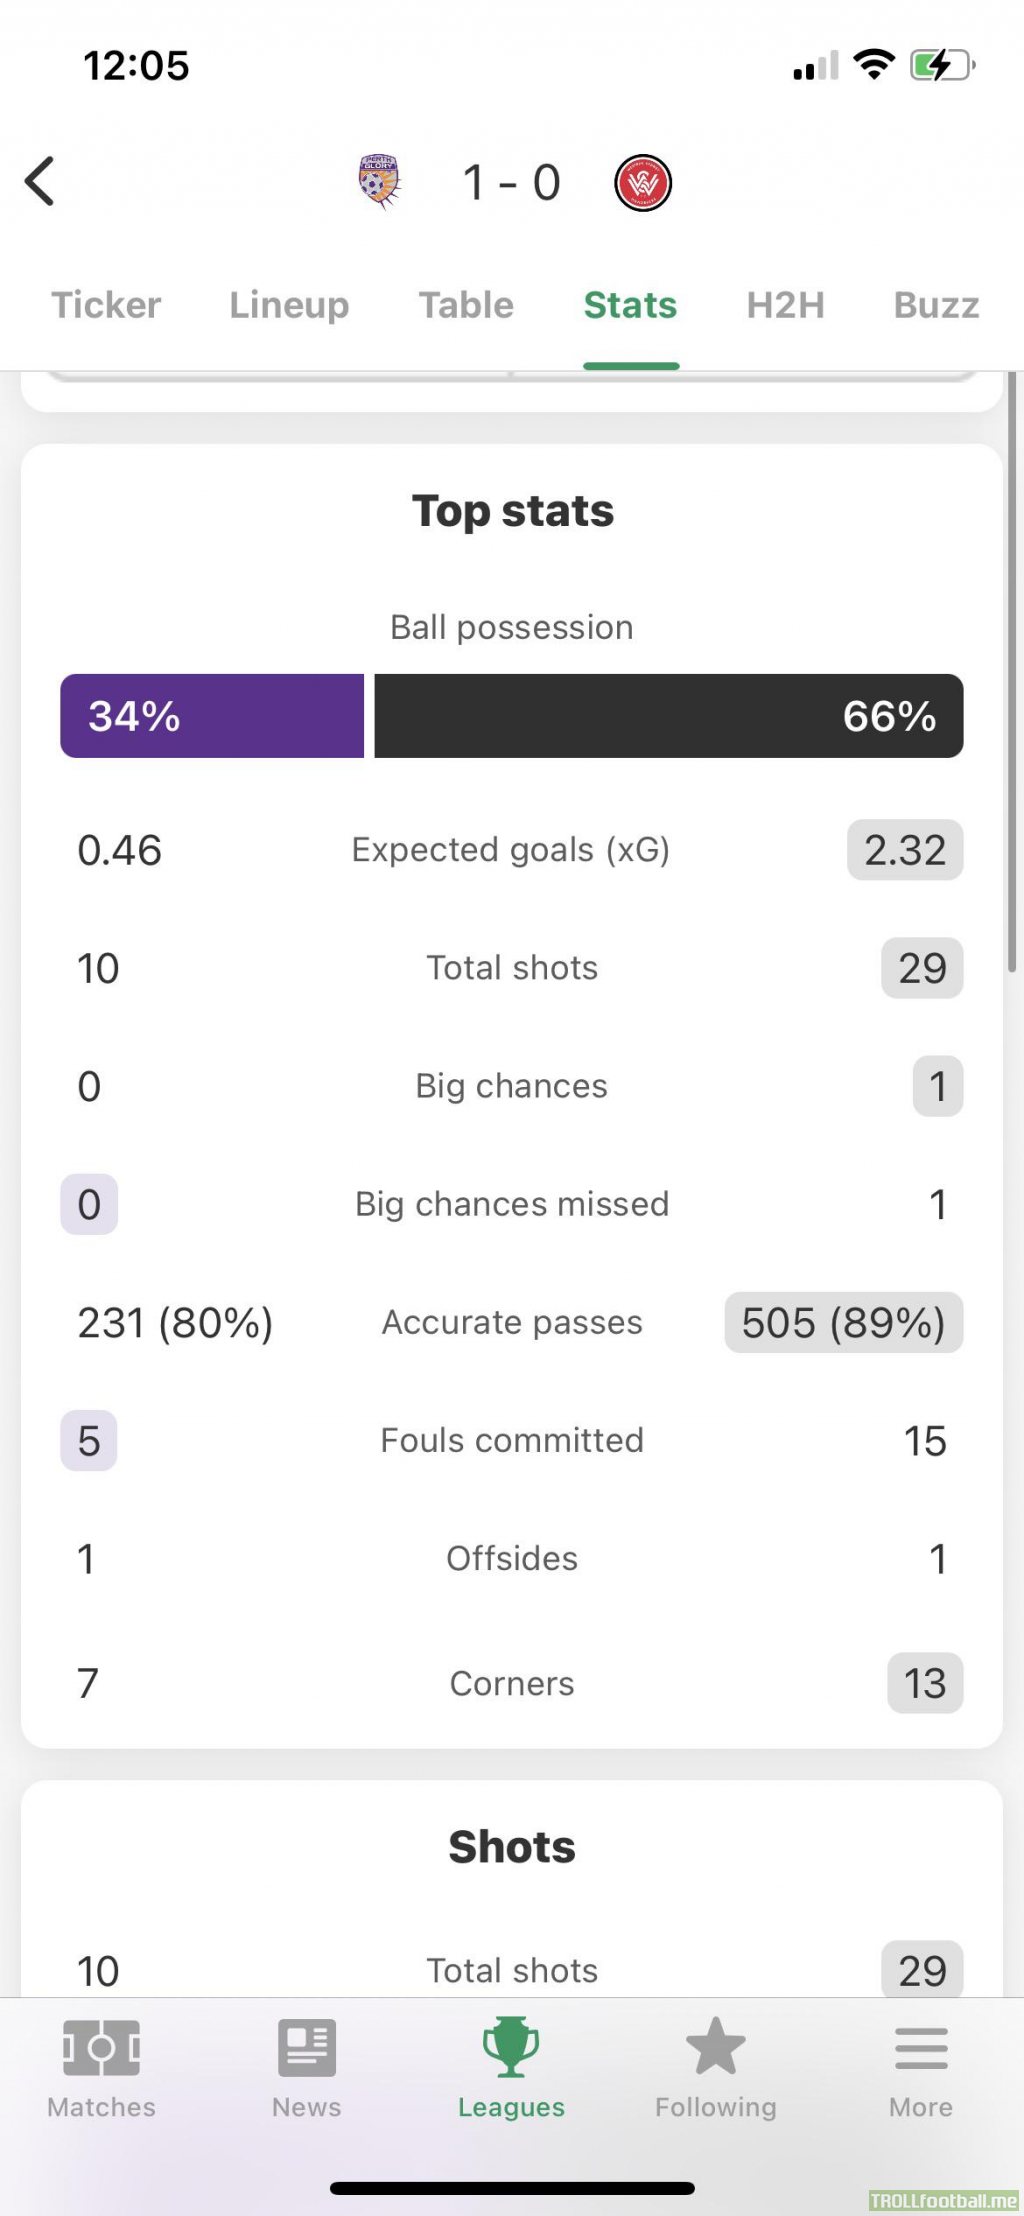 Perth glory defeats western Sydney wanderers with a 96th minute deflected goal despite being a man down from the 2nd minute